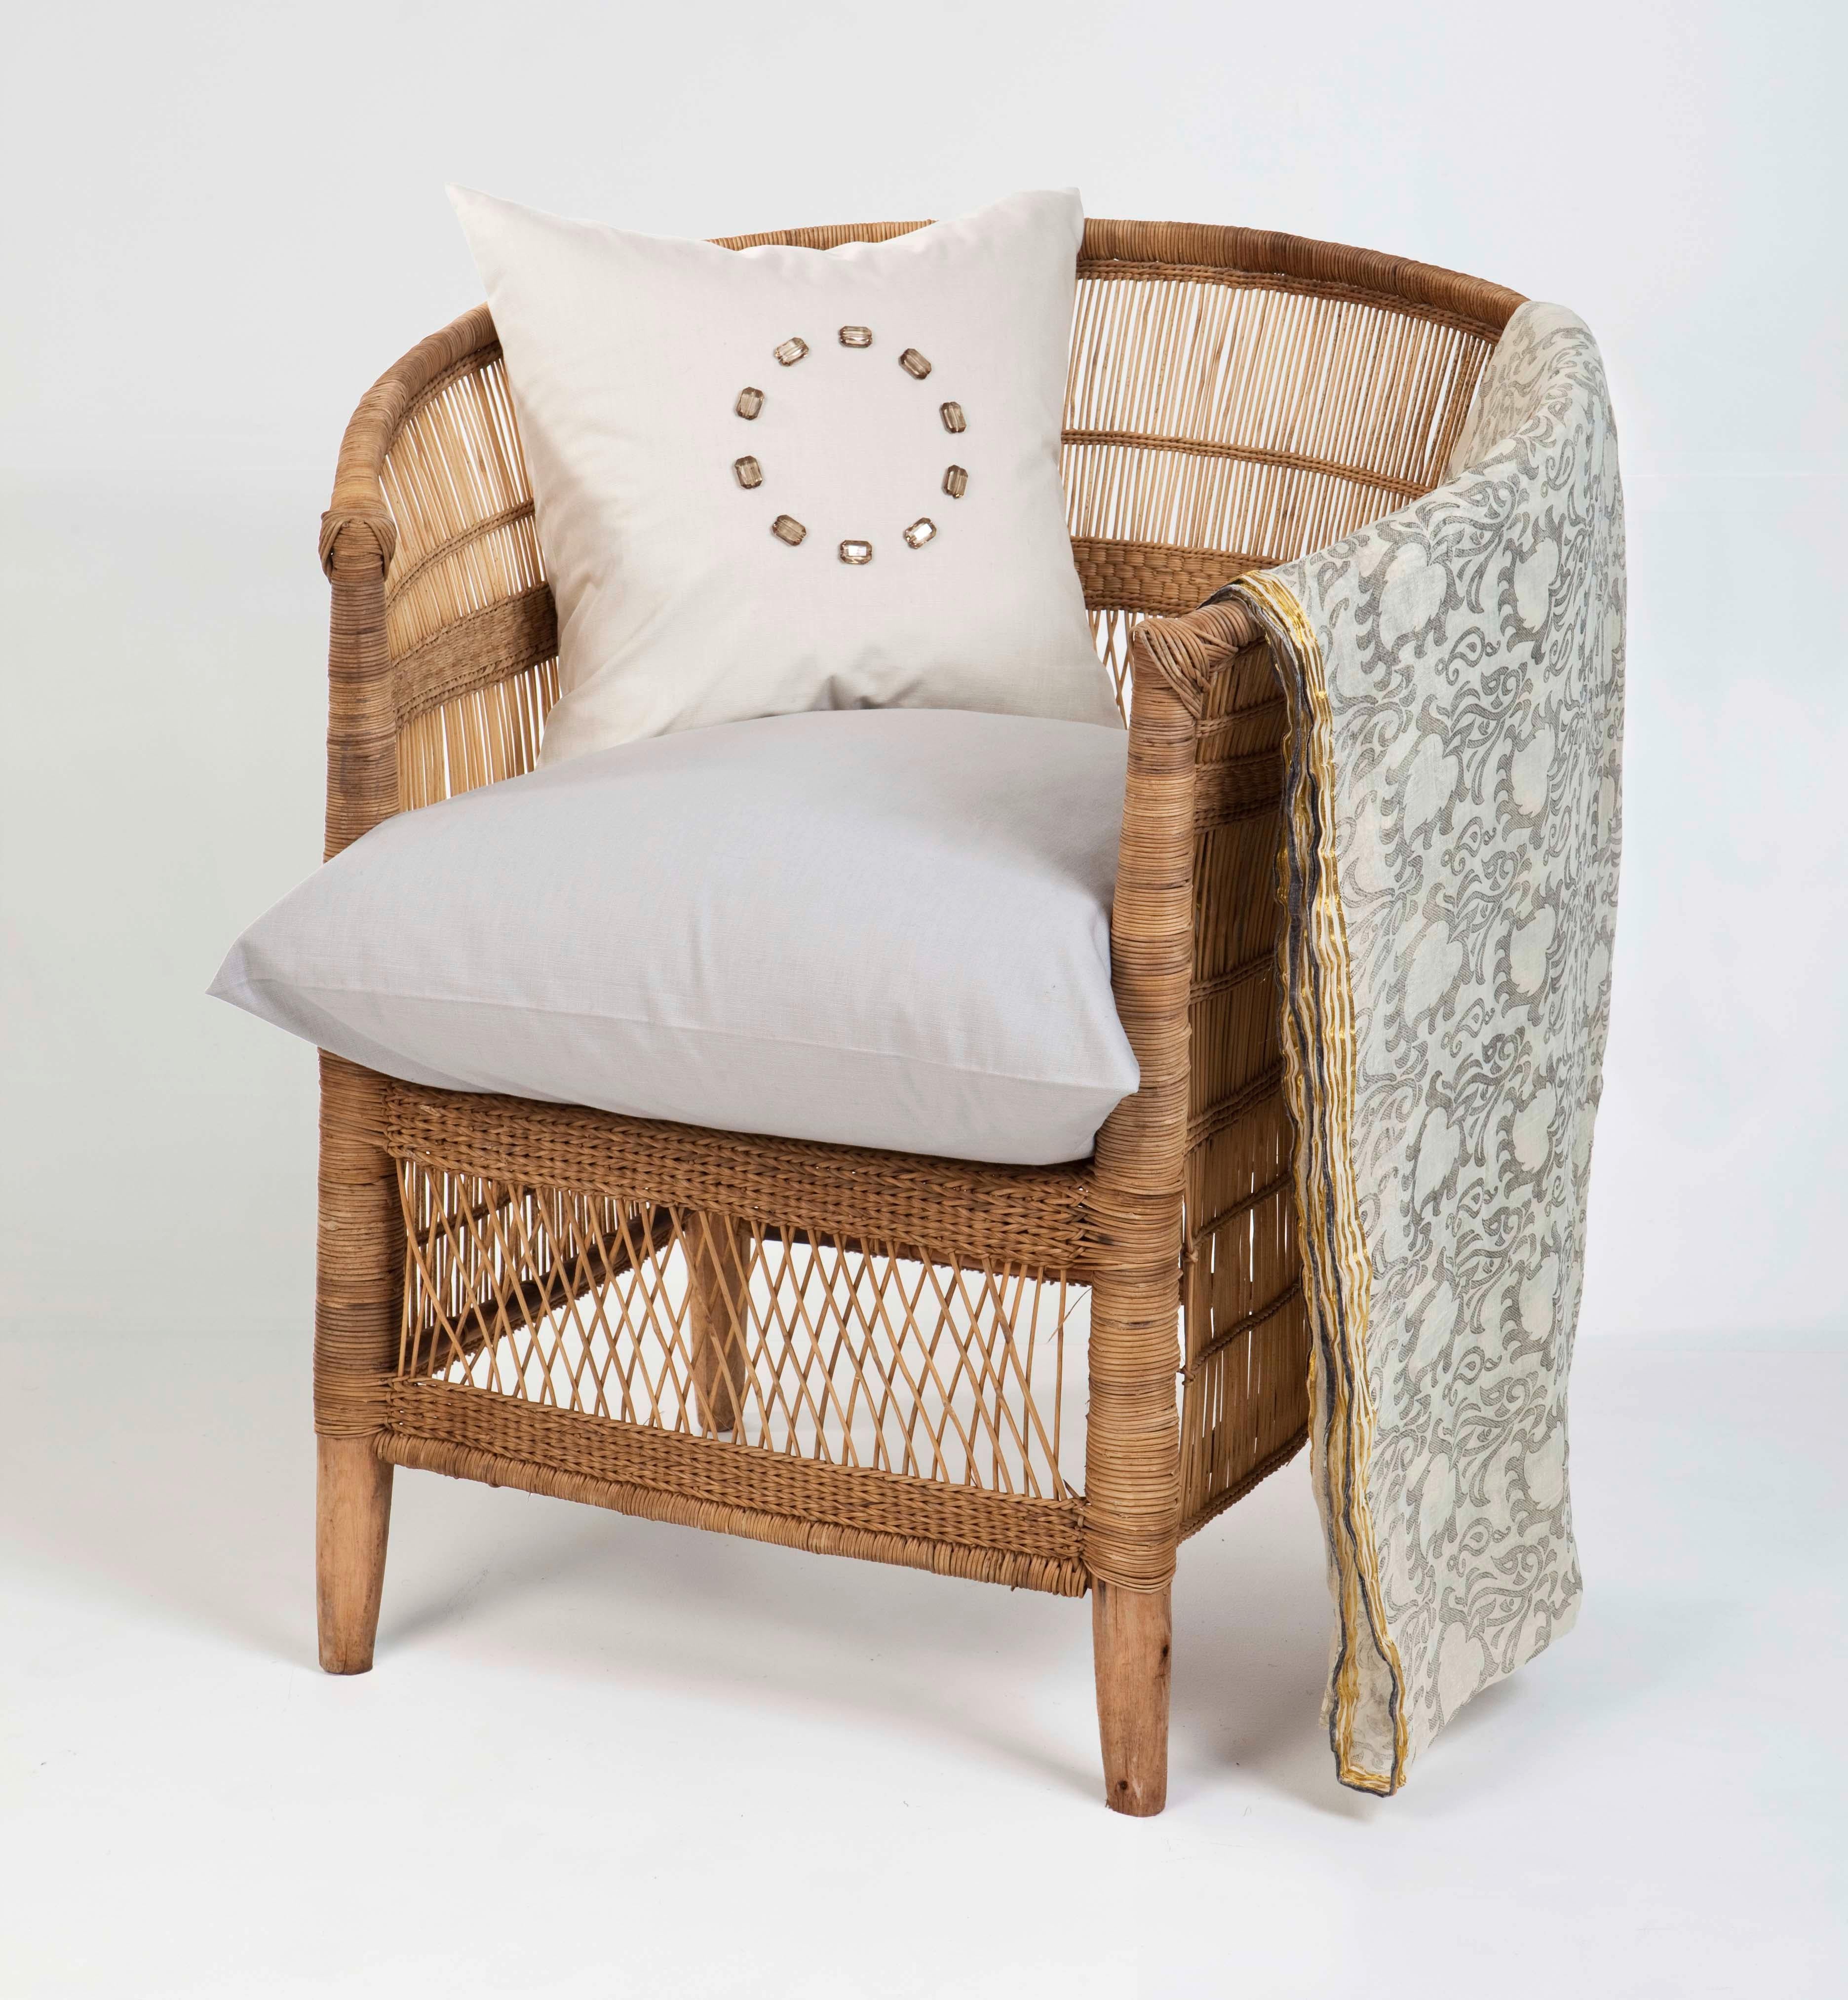 Effortless, yet intricately detailed, the wooden/bamboo frame ‘Traditional’ chair settles in comfortably in any room or deck – just quietly owning the space its in. Also known as Malawi chairs - these are quickly gaining popularity worldwide due to